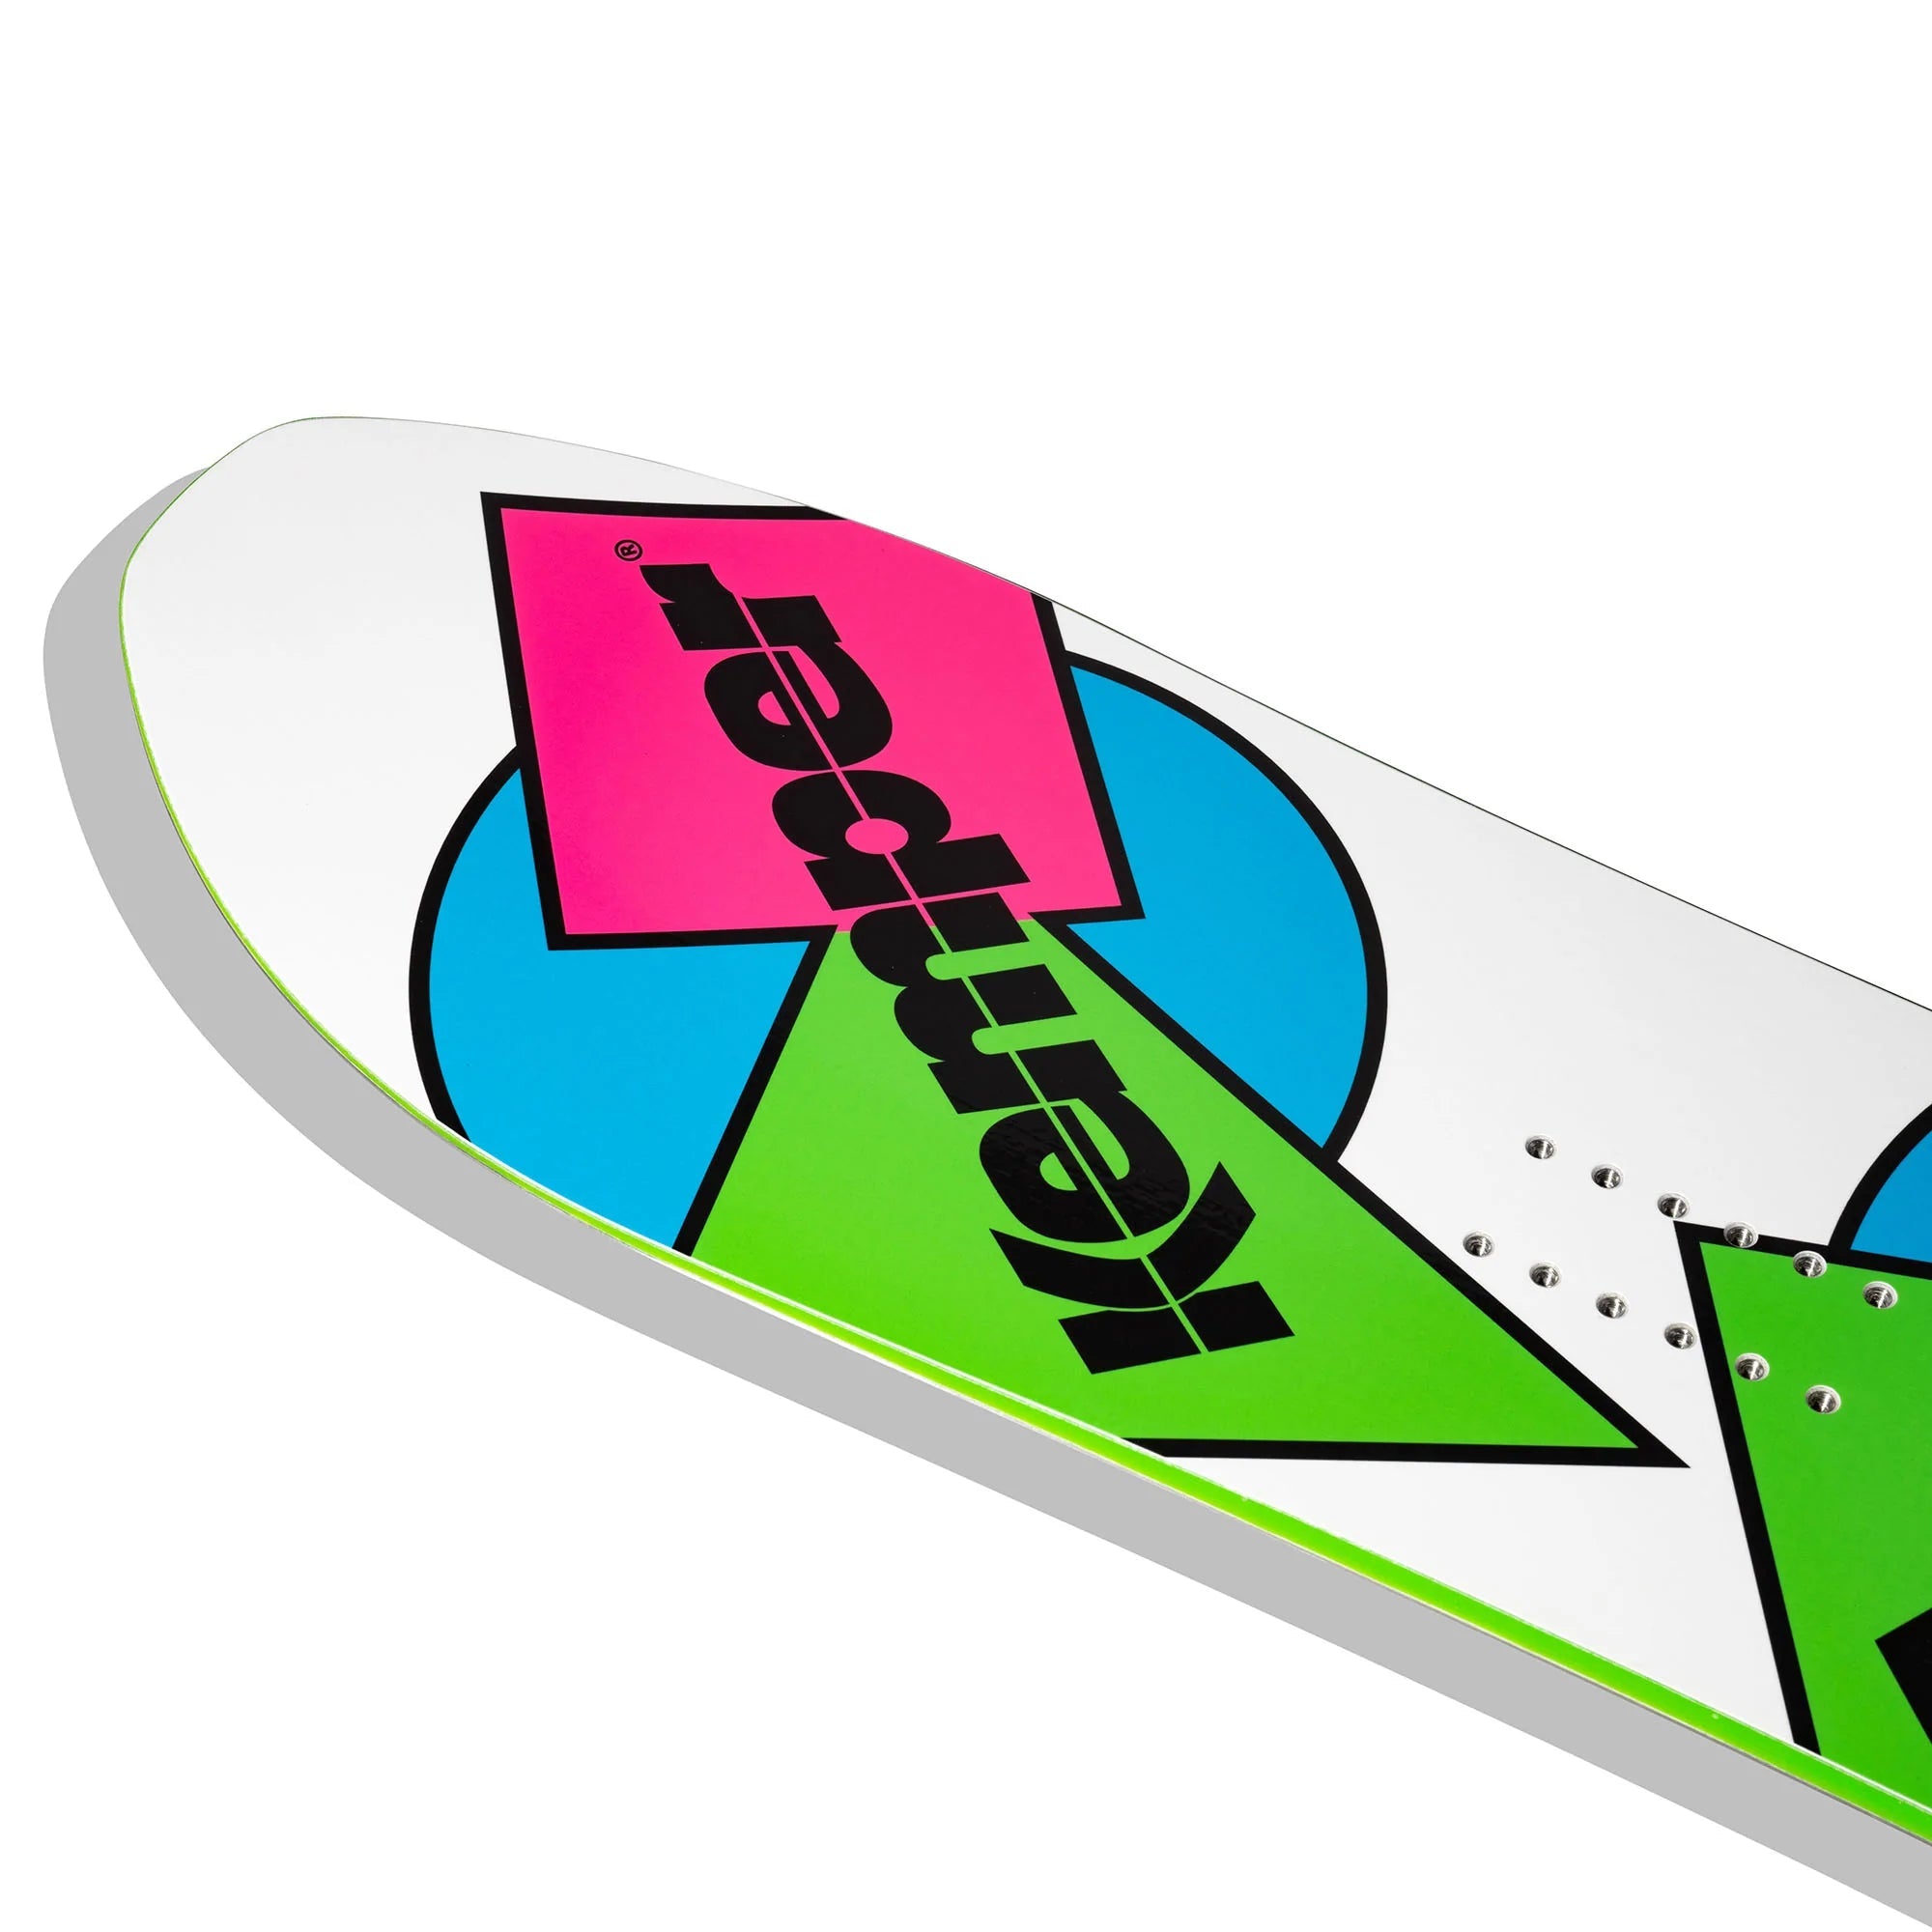 Kemper Freestyle Snowboard 2023 - FULLSEND SKI AND OUTDOOR